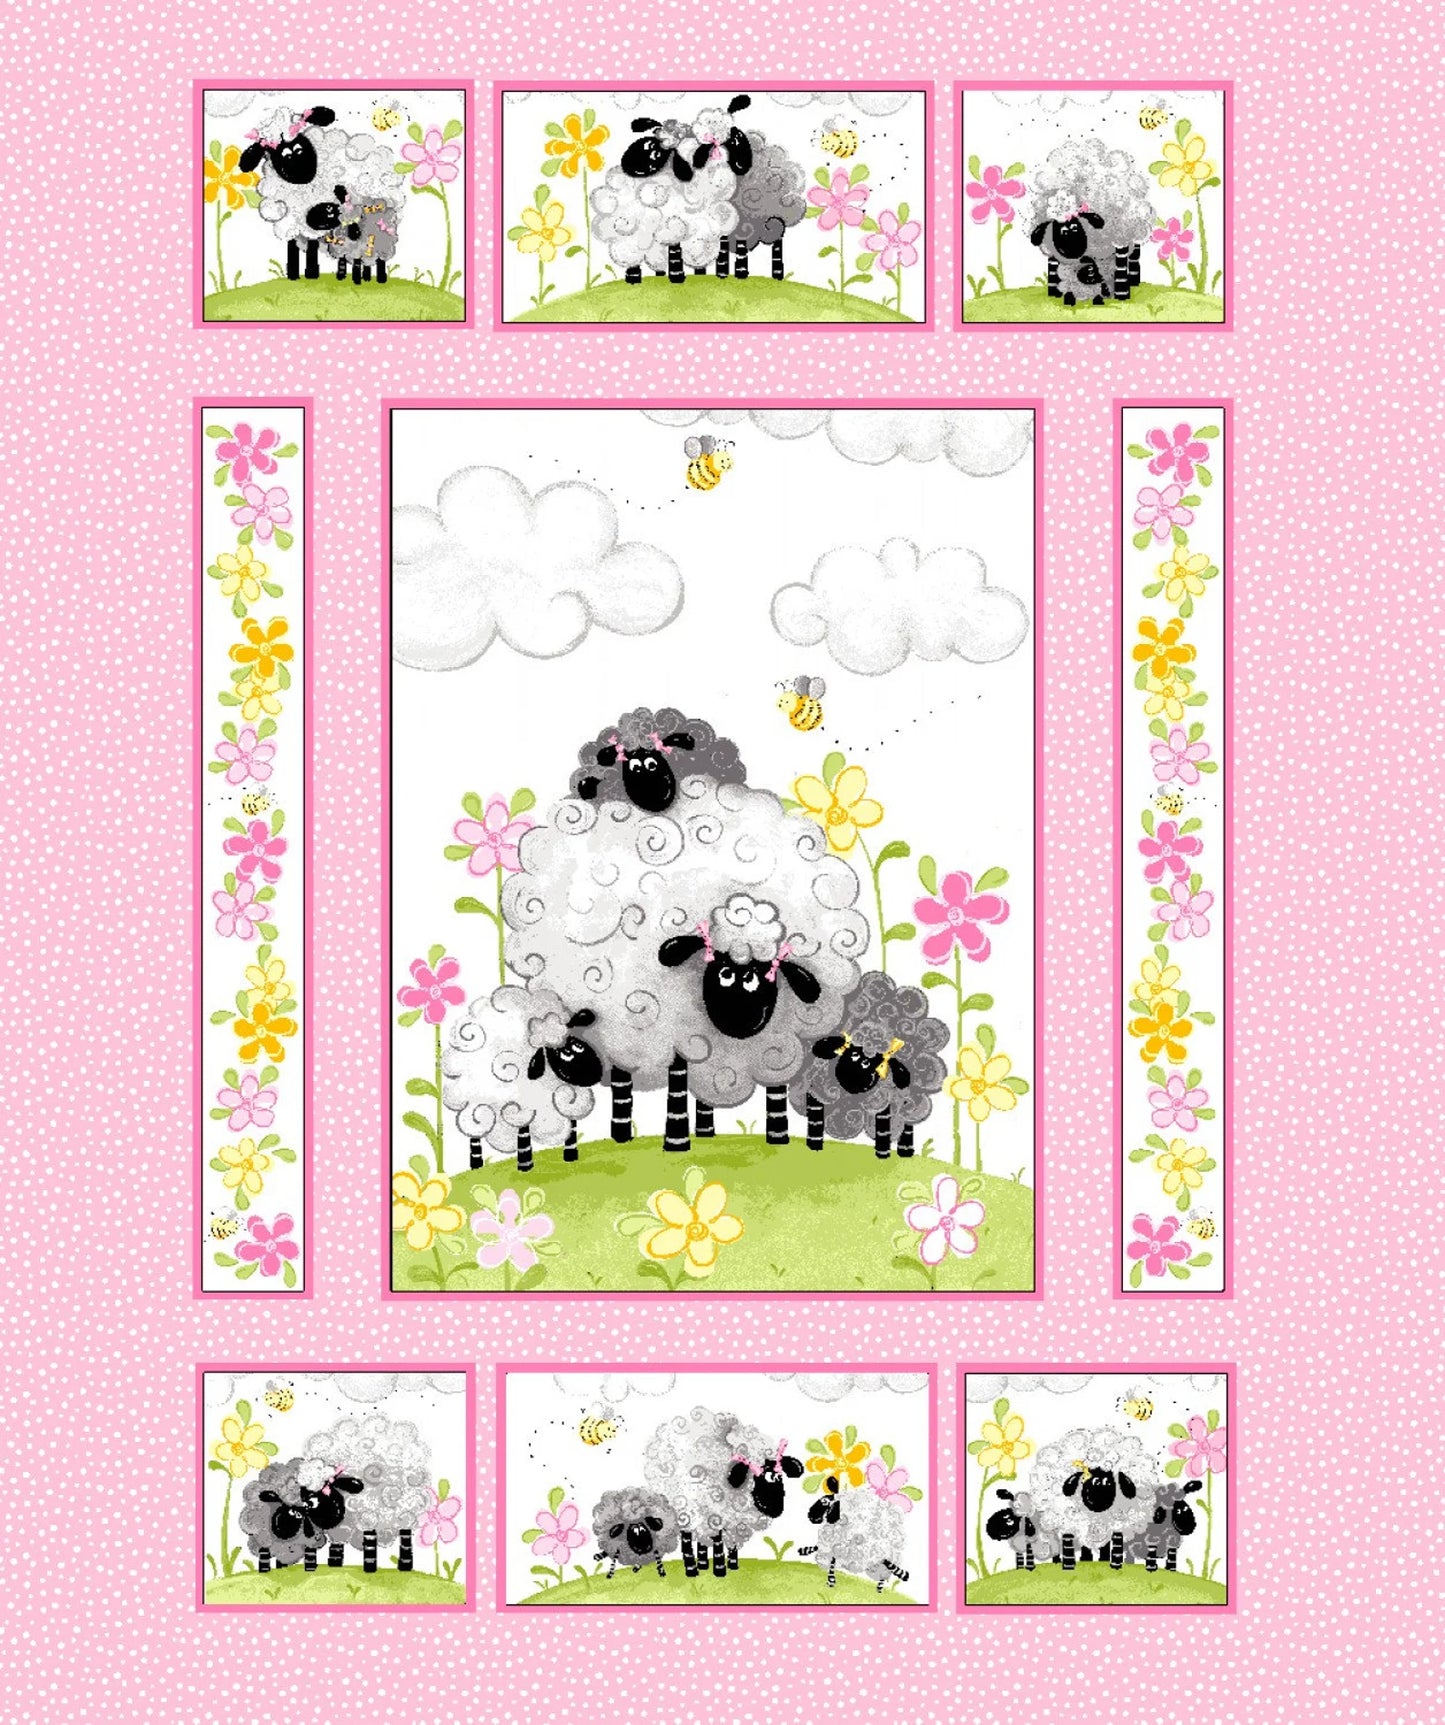 Lal The Lamb - Childs Sheep Cot Panel for Baby Blanket, Quilt, Bedding etc